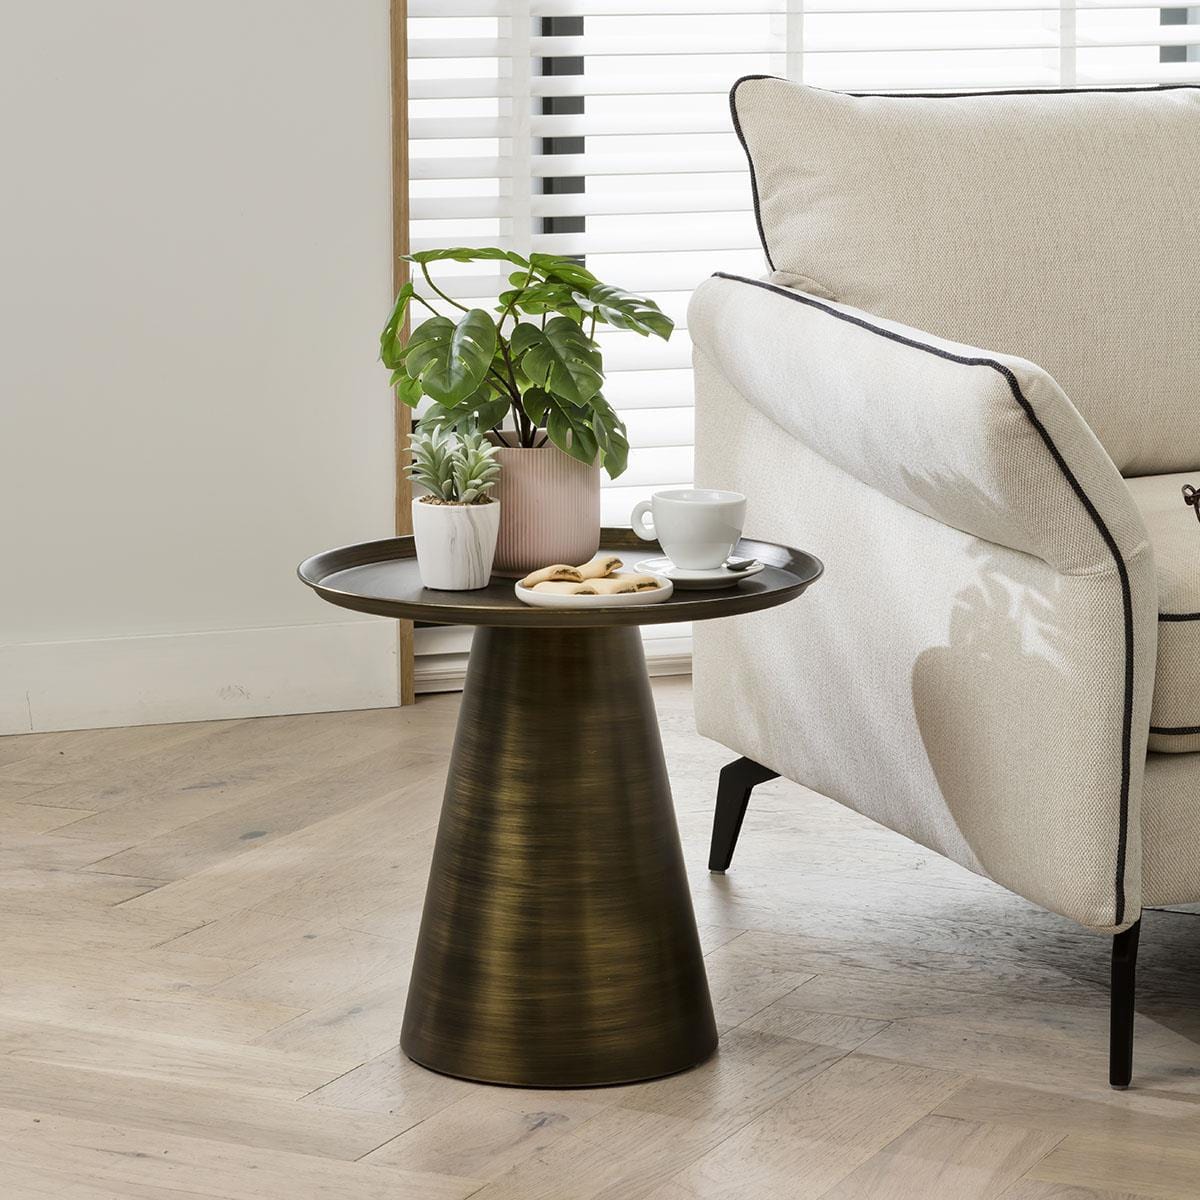 Quatropi Modern Metal Side Table - Gold Coned Shape Round Lamp Table 48cm